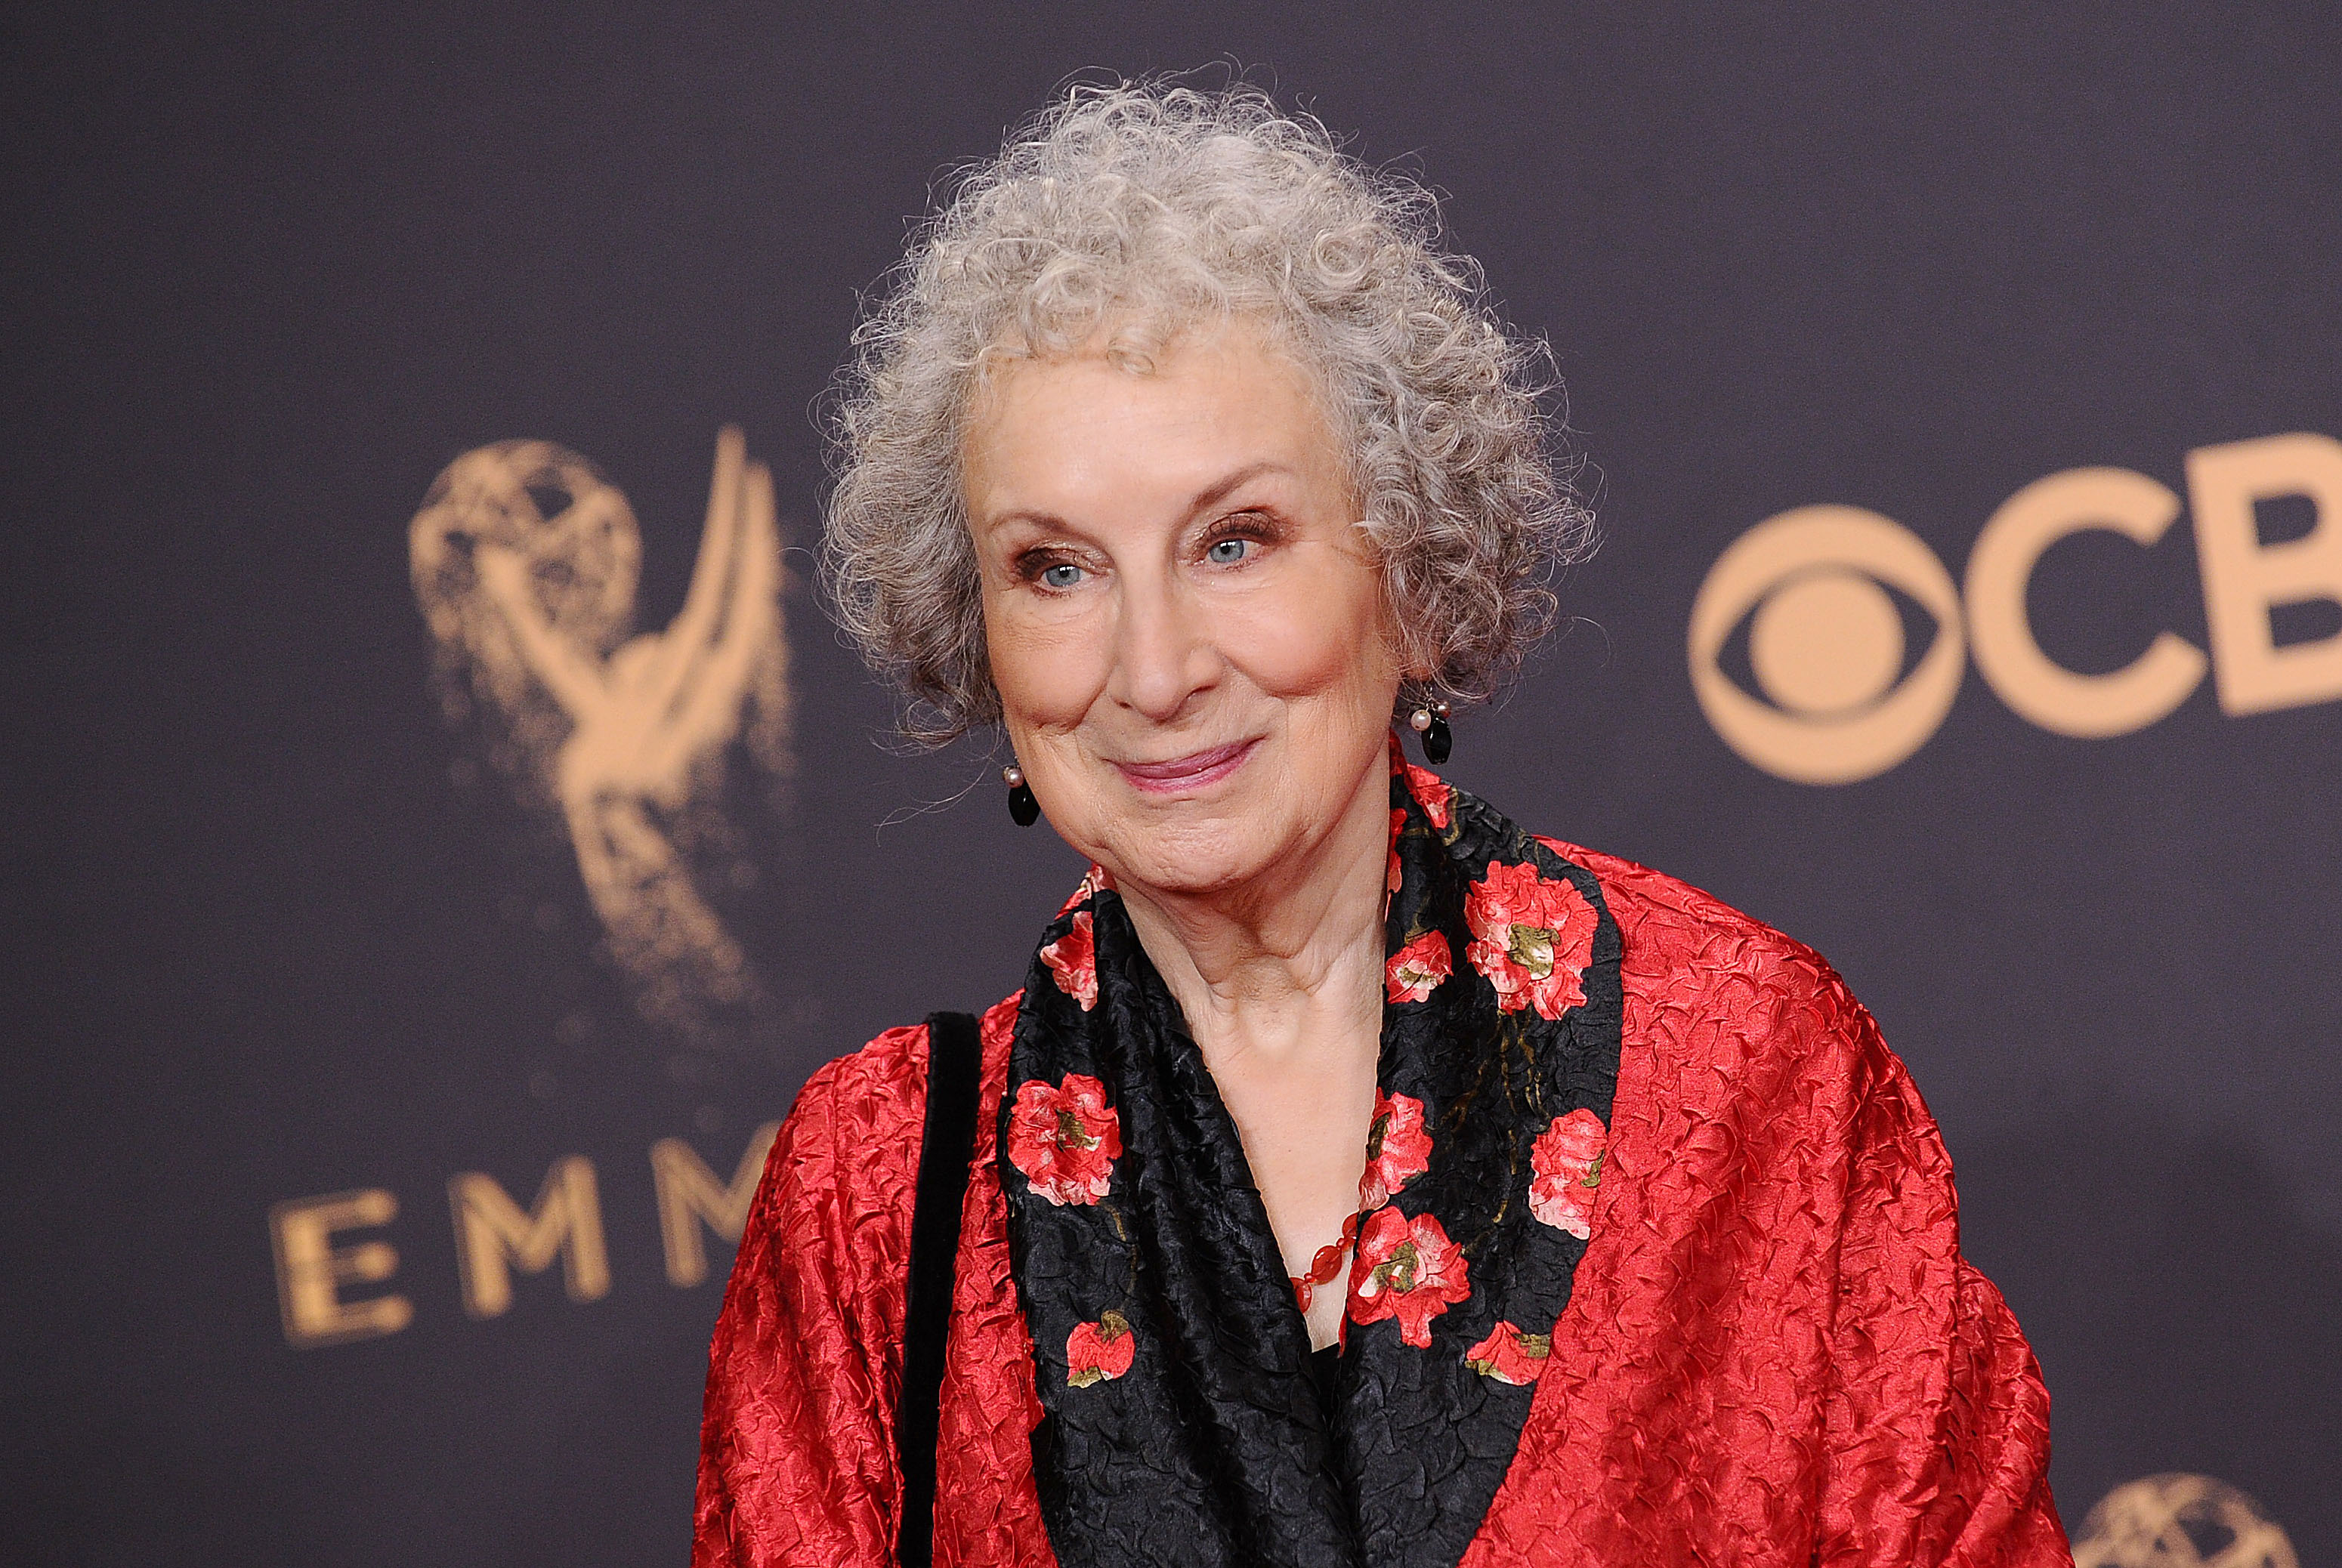 The Handmaid's Tale author Margaret Atwood wearing red